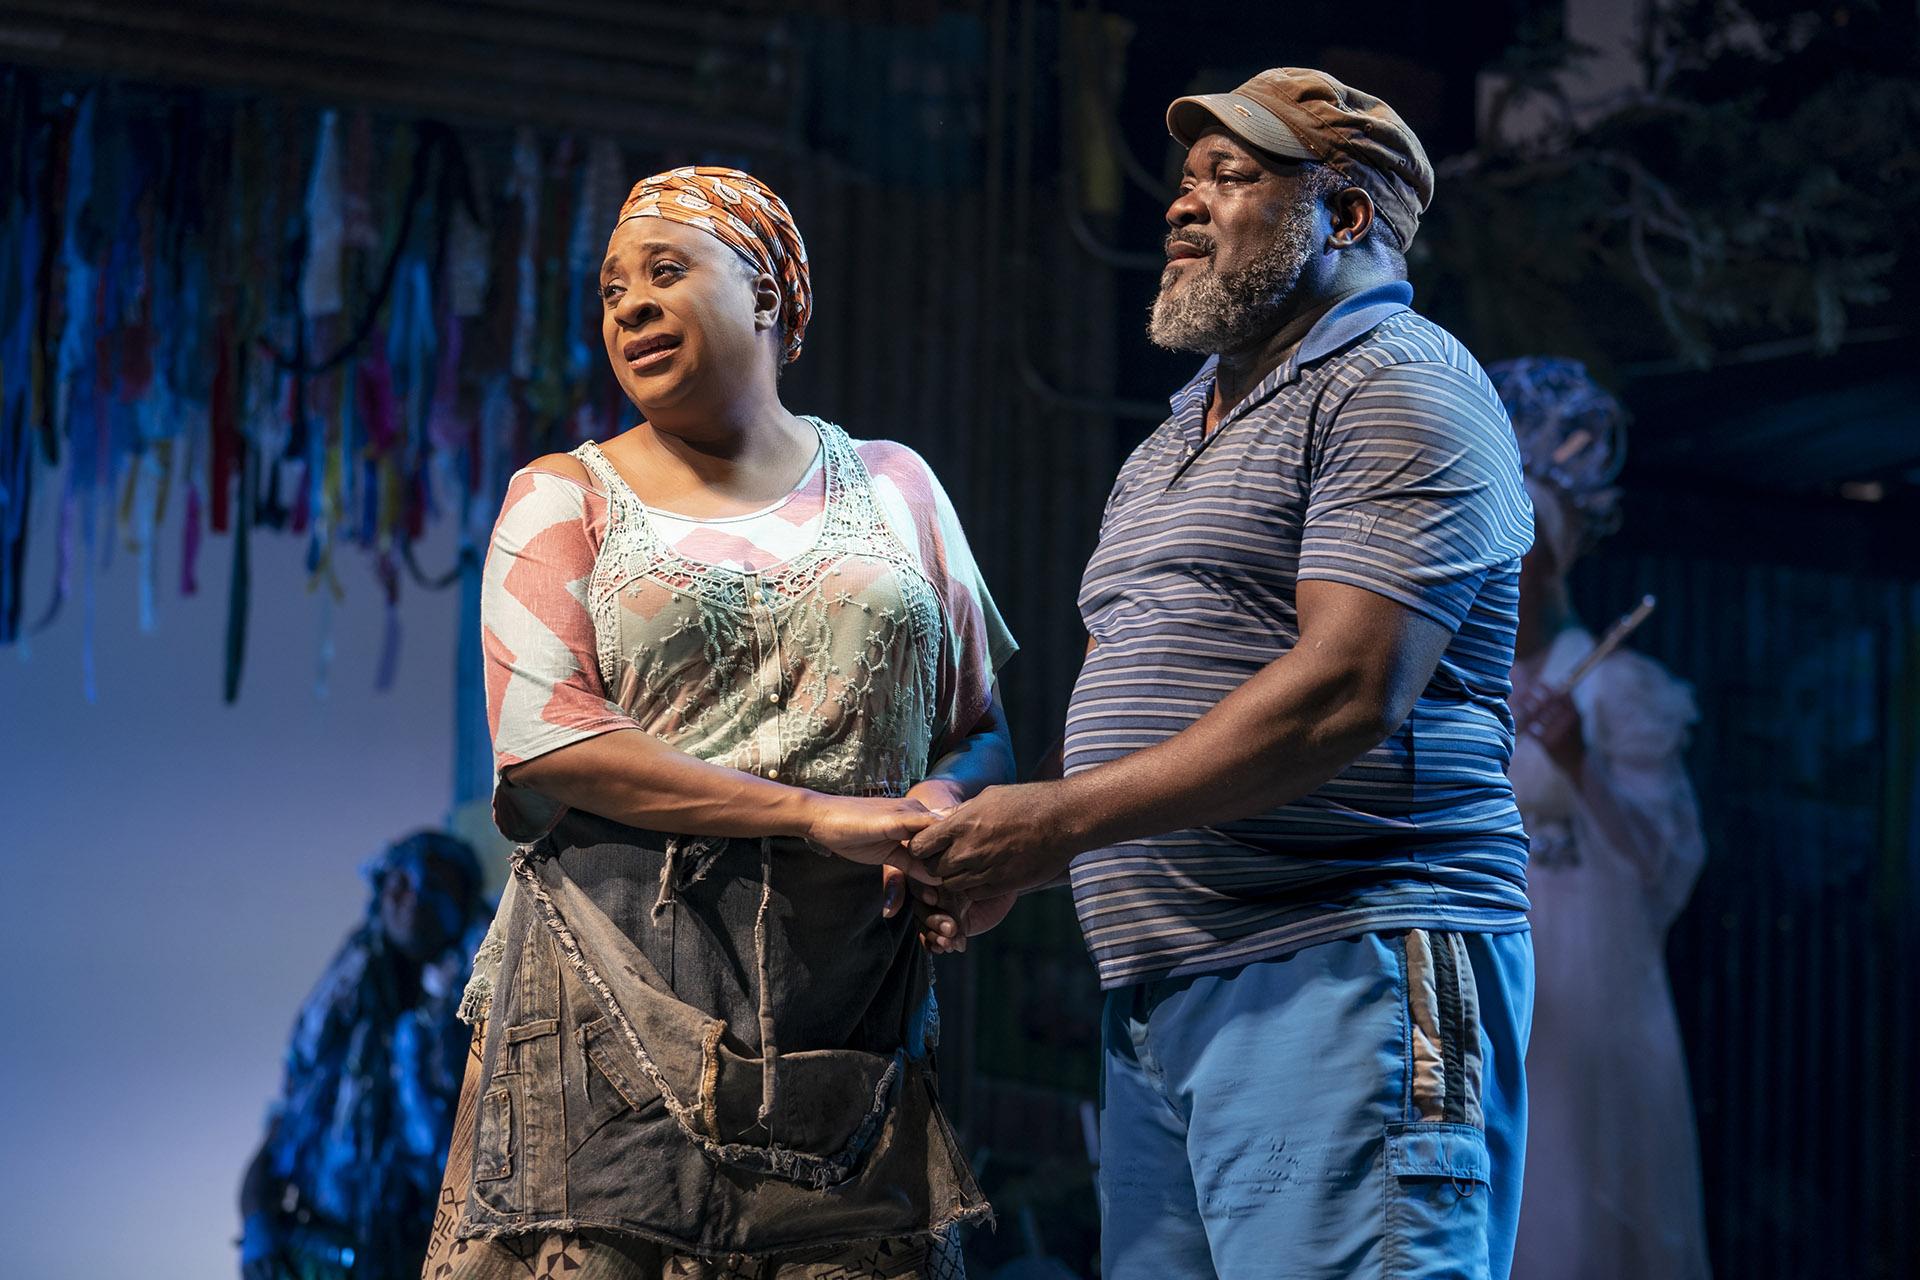 Danielle Lee Greaves (left) as Mama Euralie and Phillip Boykin as Tonton Julian in the North American Tour of “Once On This Island.” (Photo by Joan Marcus / 2019)